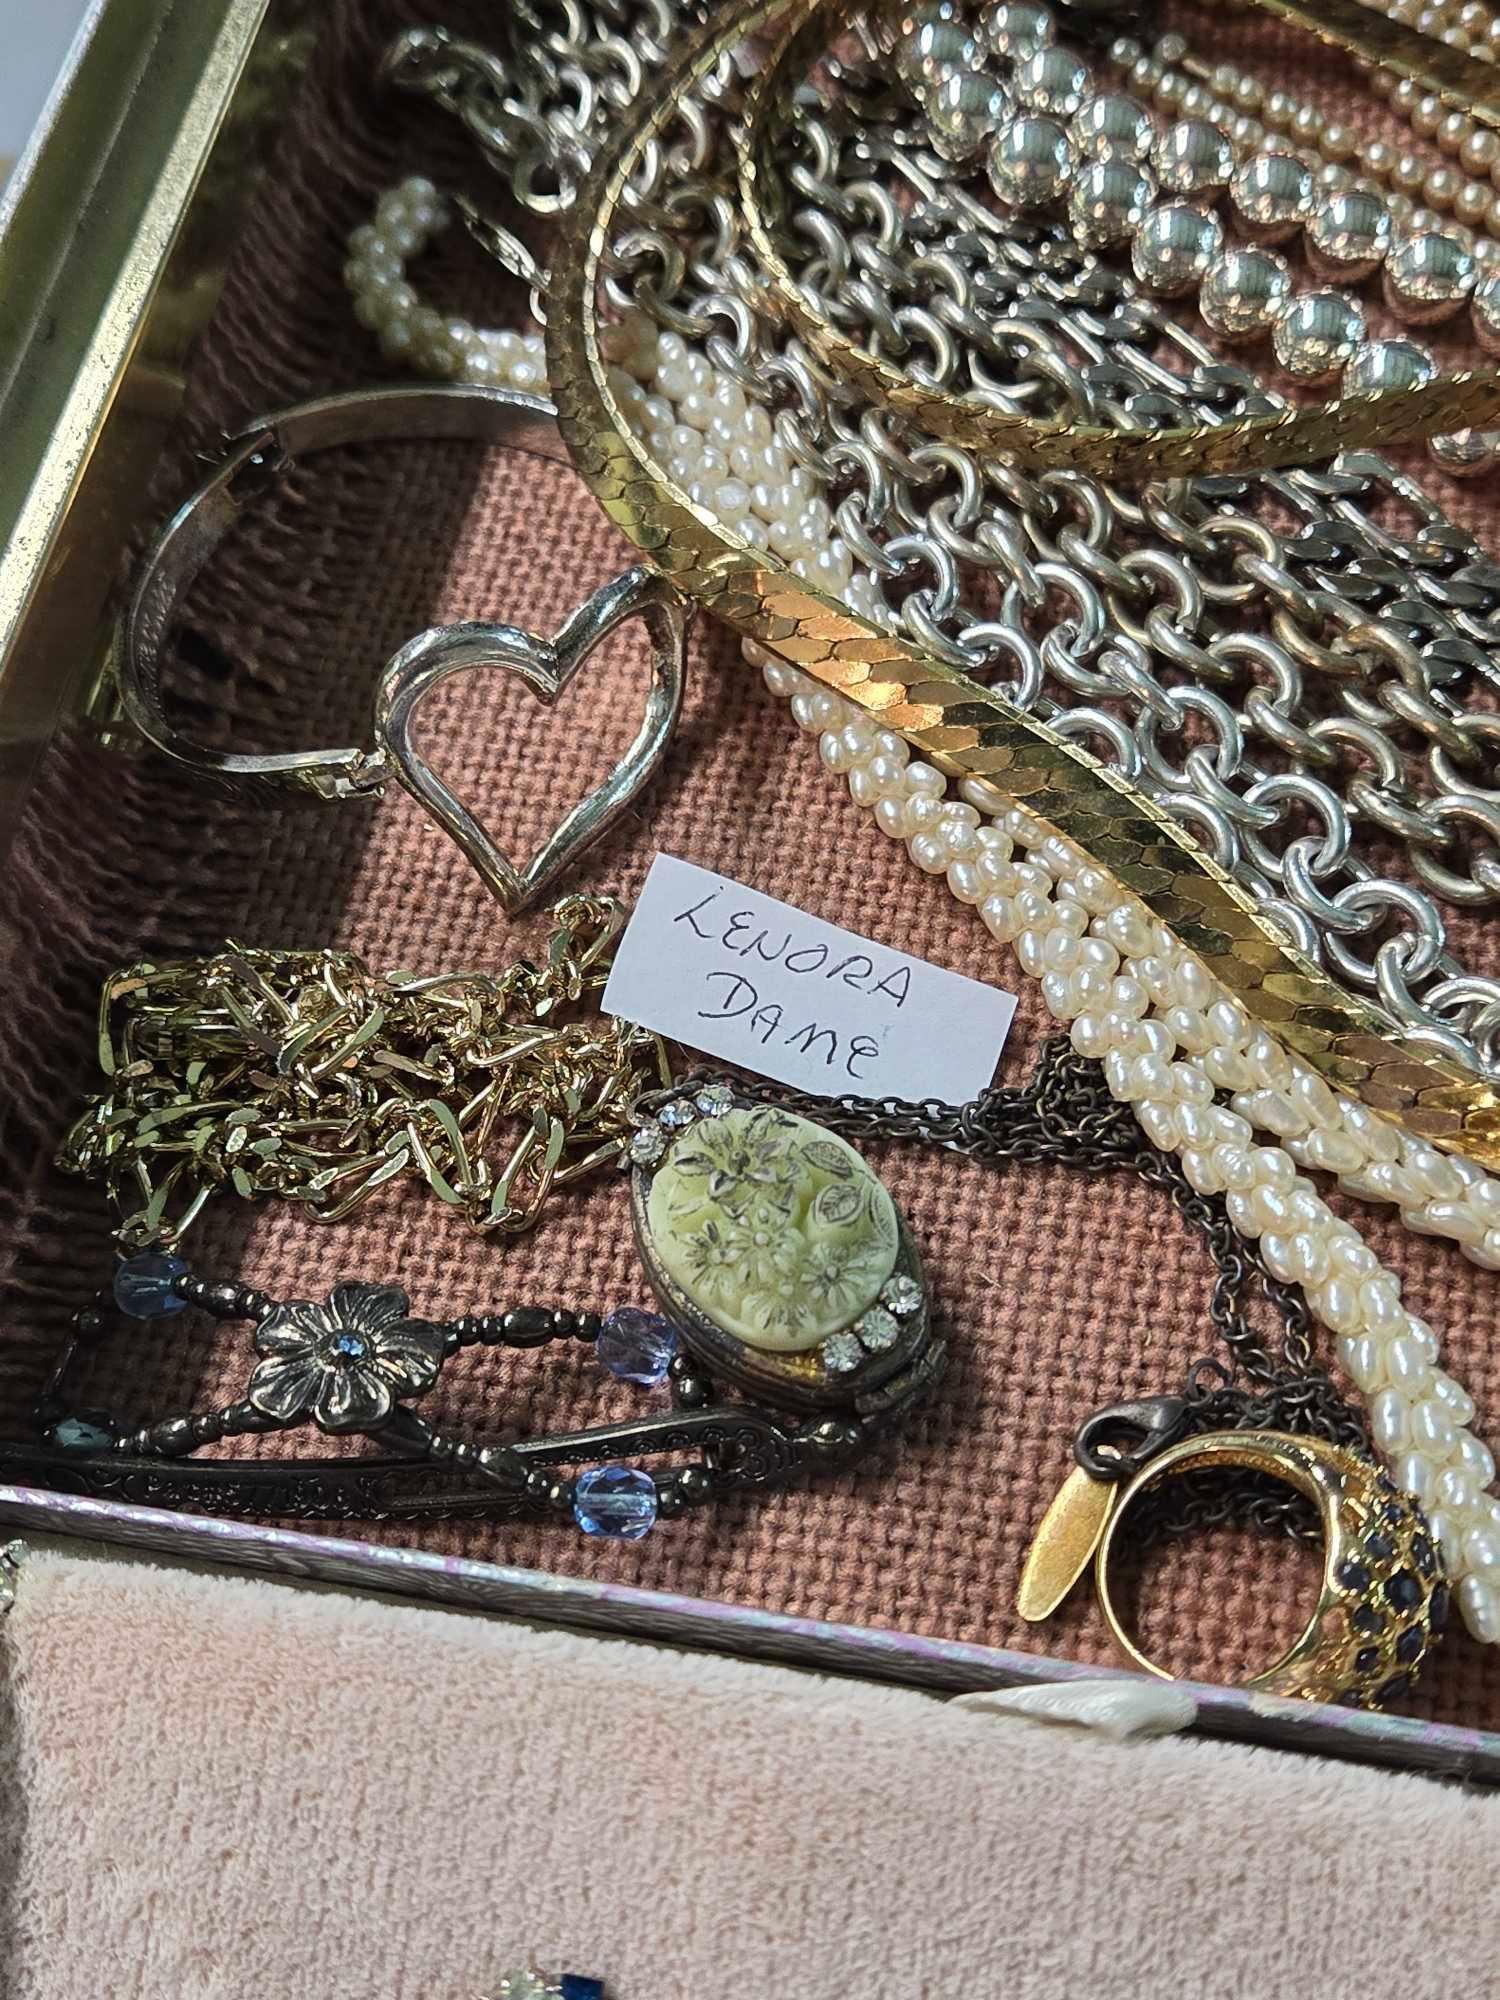 Case Lot of Jewelry Incl. Vintage